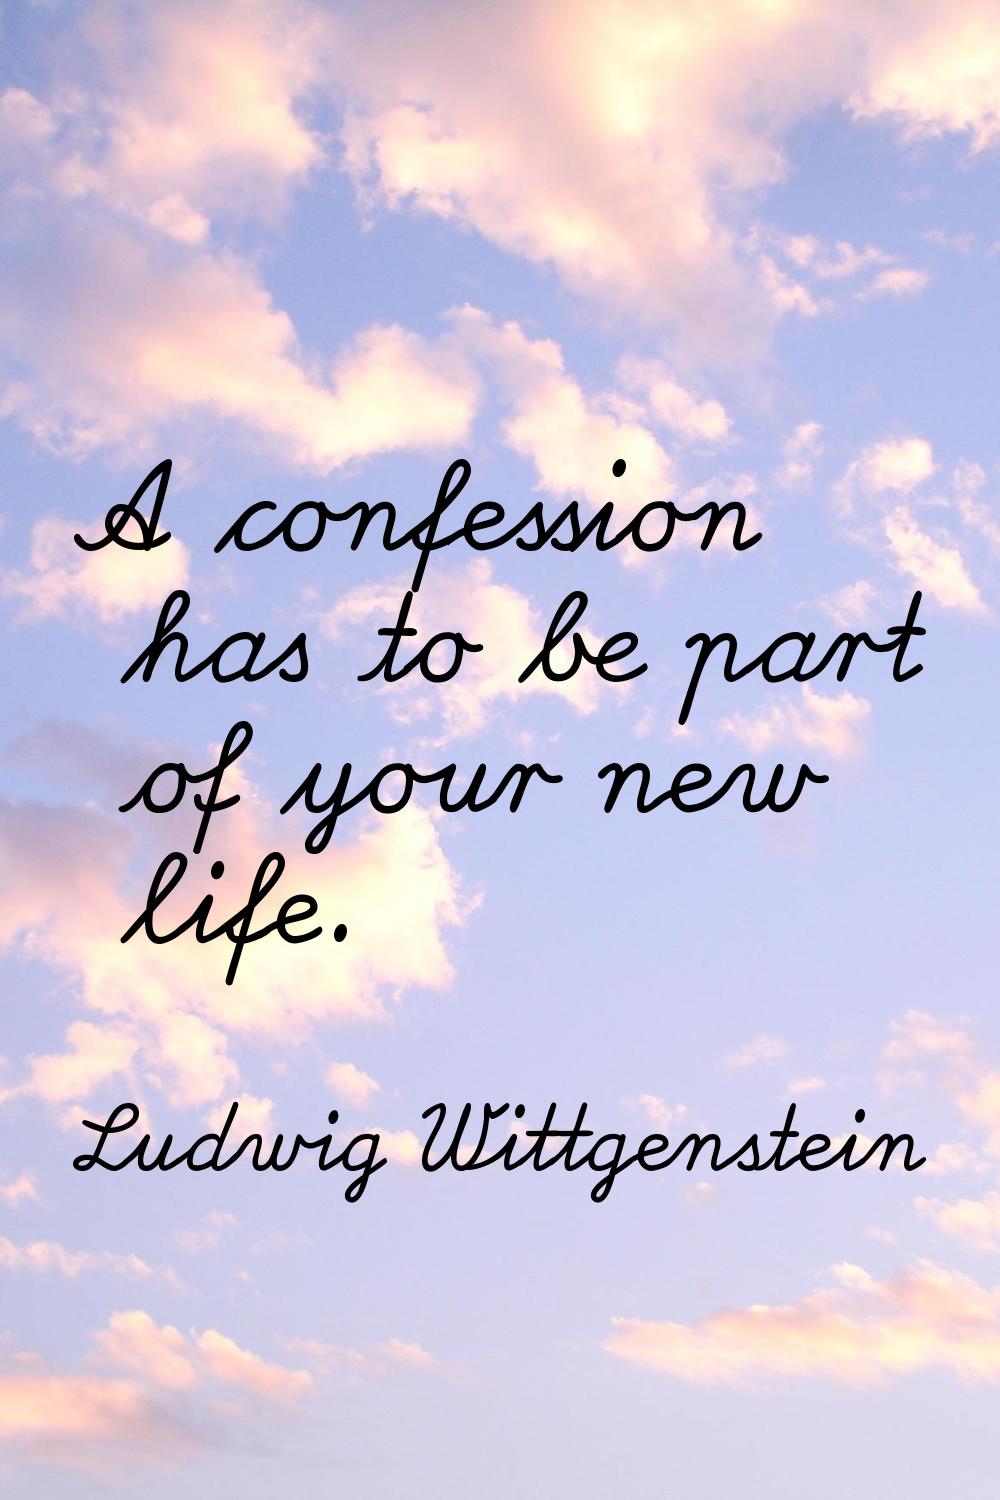 A confession has to be part of your new life.